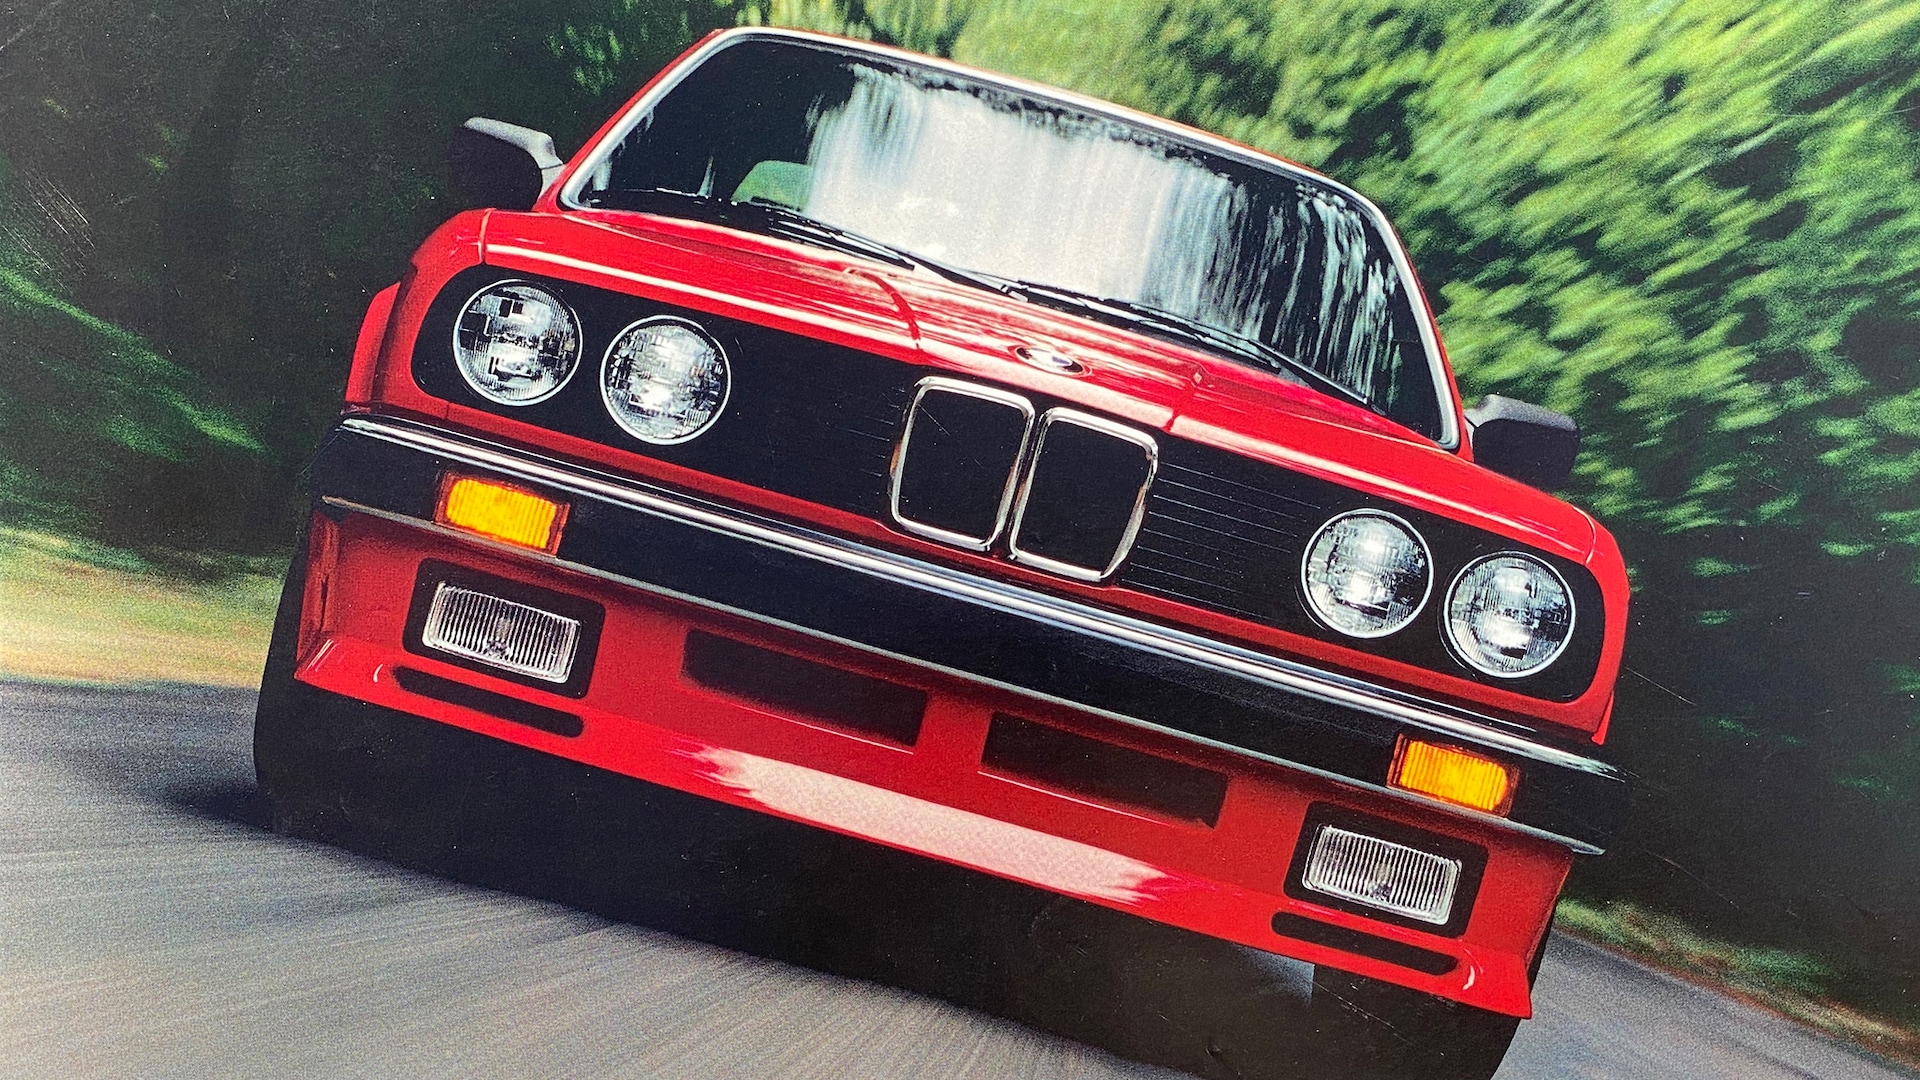 BMW's Amazing '80s Ads: How The Ultimate Driving Machine Got Its Aesthetic